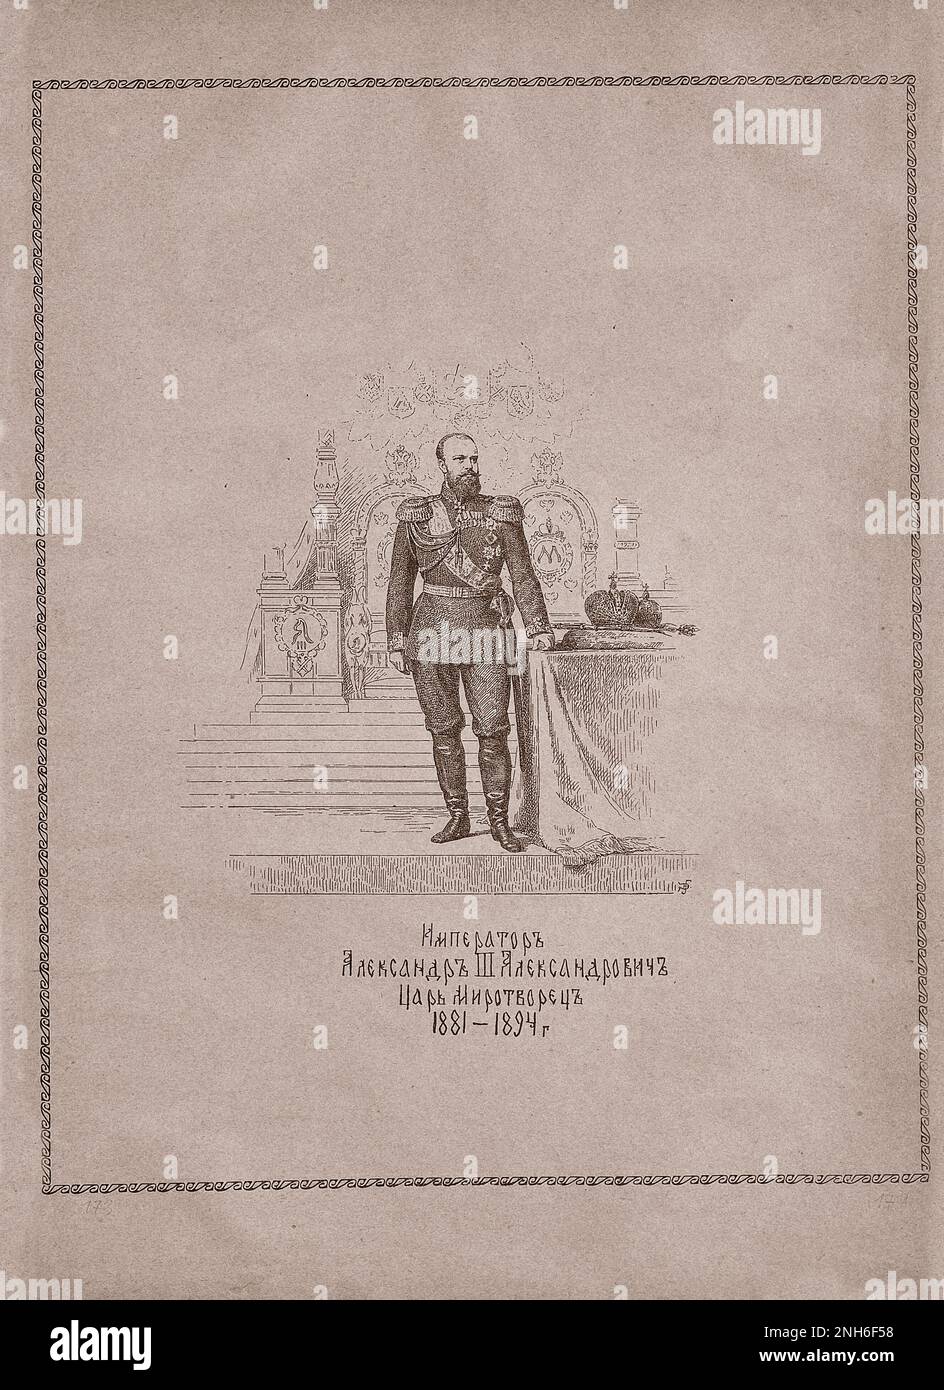 Engraving of Alexander III of Russia. 1913 Alexander III (1845–1894) was Emperor of Russia, King of Poland and Grand Duke of Finland from 13 March 1881 until his death in 1894. He was highly reactionary and reversed some of the liberal reforms of his father, Alexander II. This policy is known in Russia as 'counter-reforms' (Russian: контрреформы). Under the influence of Konstantin Pobedonostsev (1827–1907), he opposed any reform that limited his autocratic rule. During his reign, Russia fought no major wars; he was therefore styled 'The Peacemaker'. He helped forge the Russo-French Alliance. Stock Photo